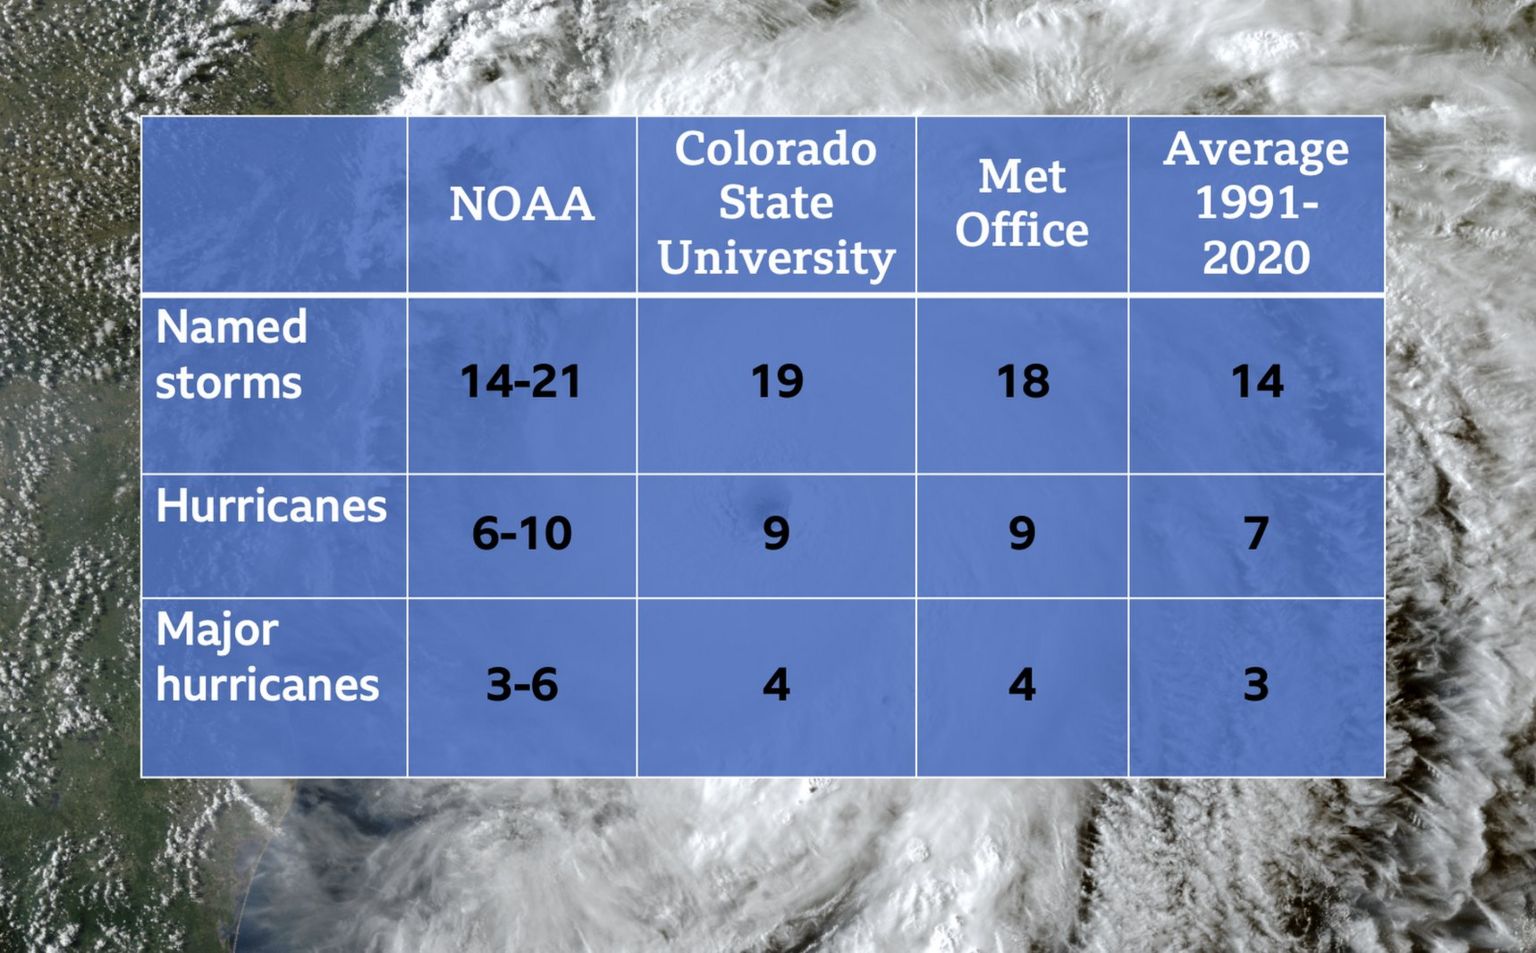 Table showing the pre-season forecasts for named tropical storms, hurricanes and major hurricanes along with the long term average